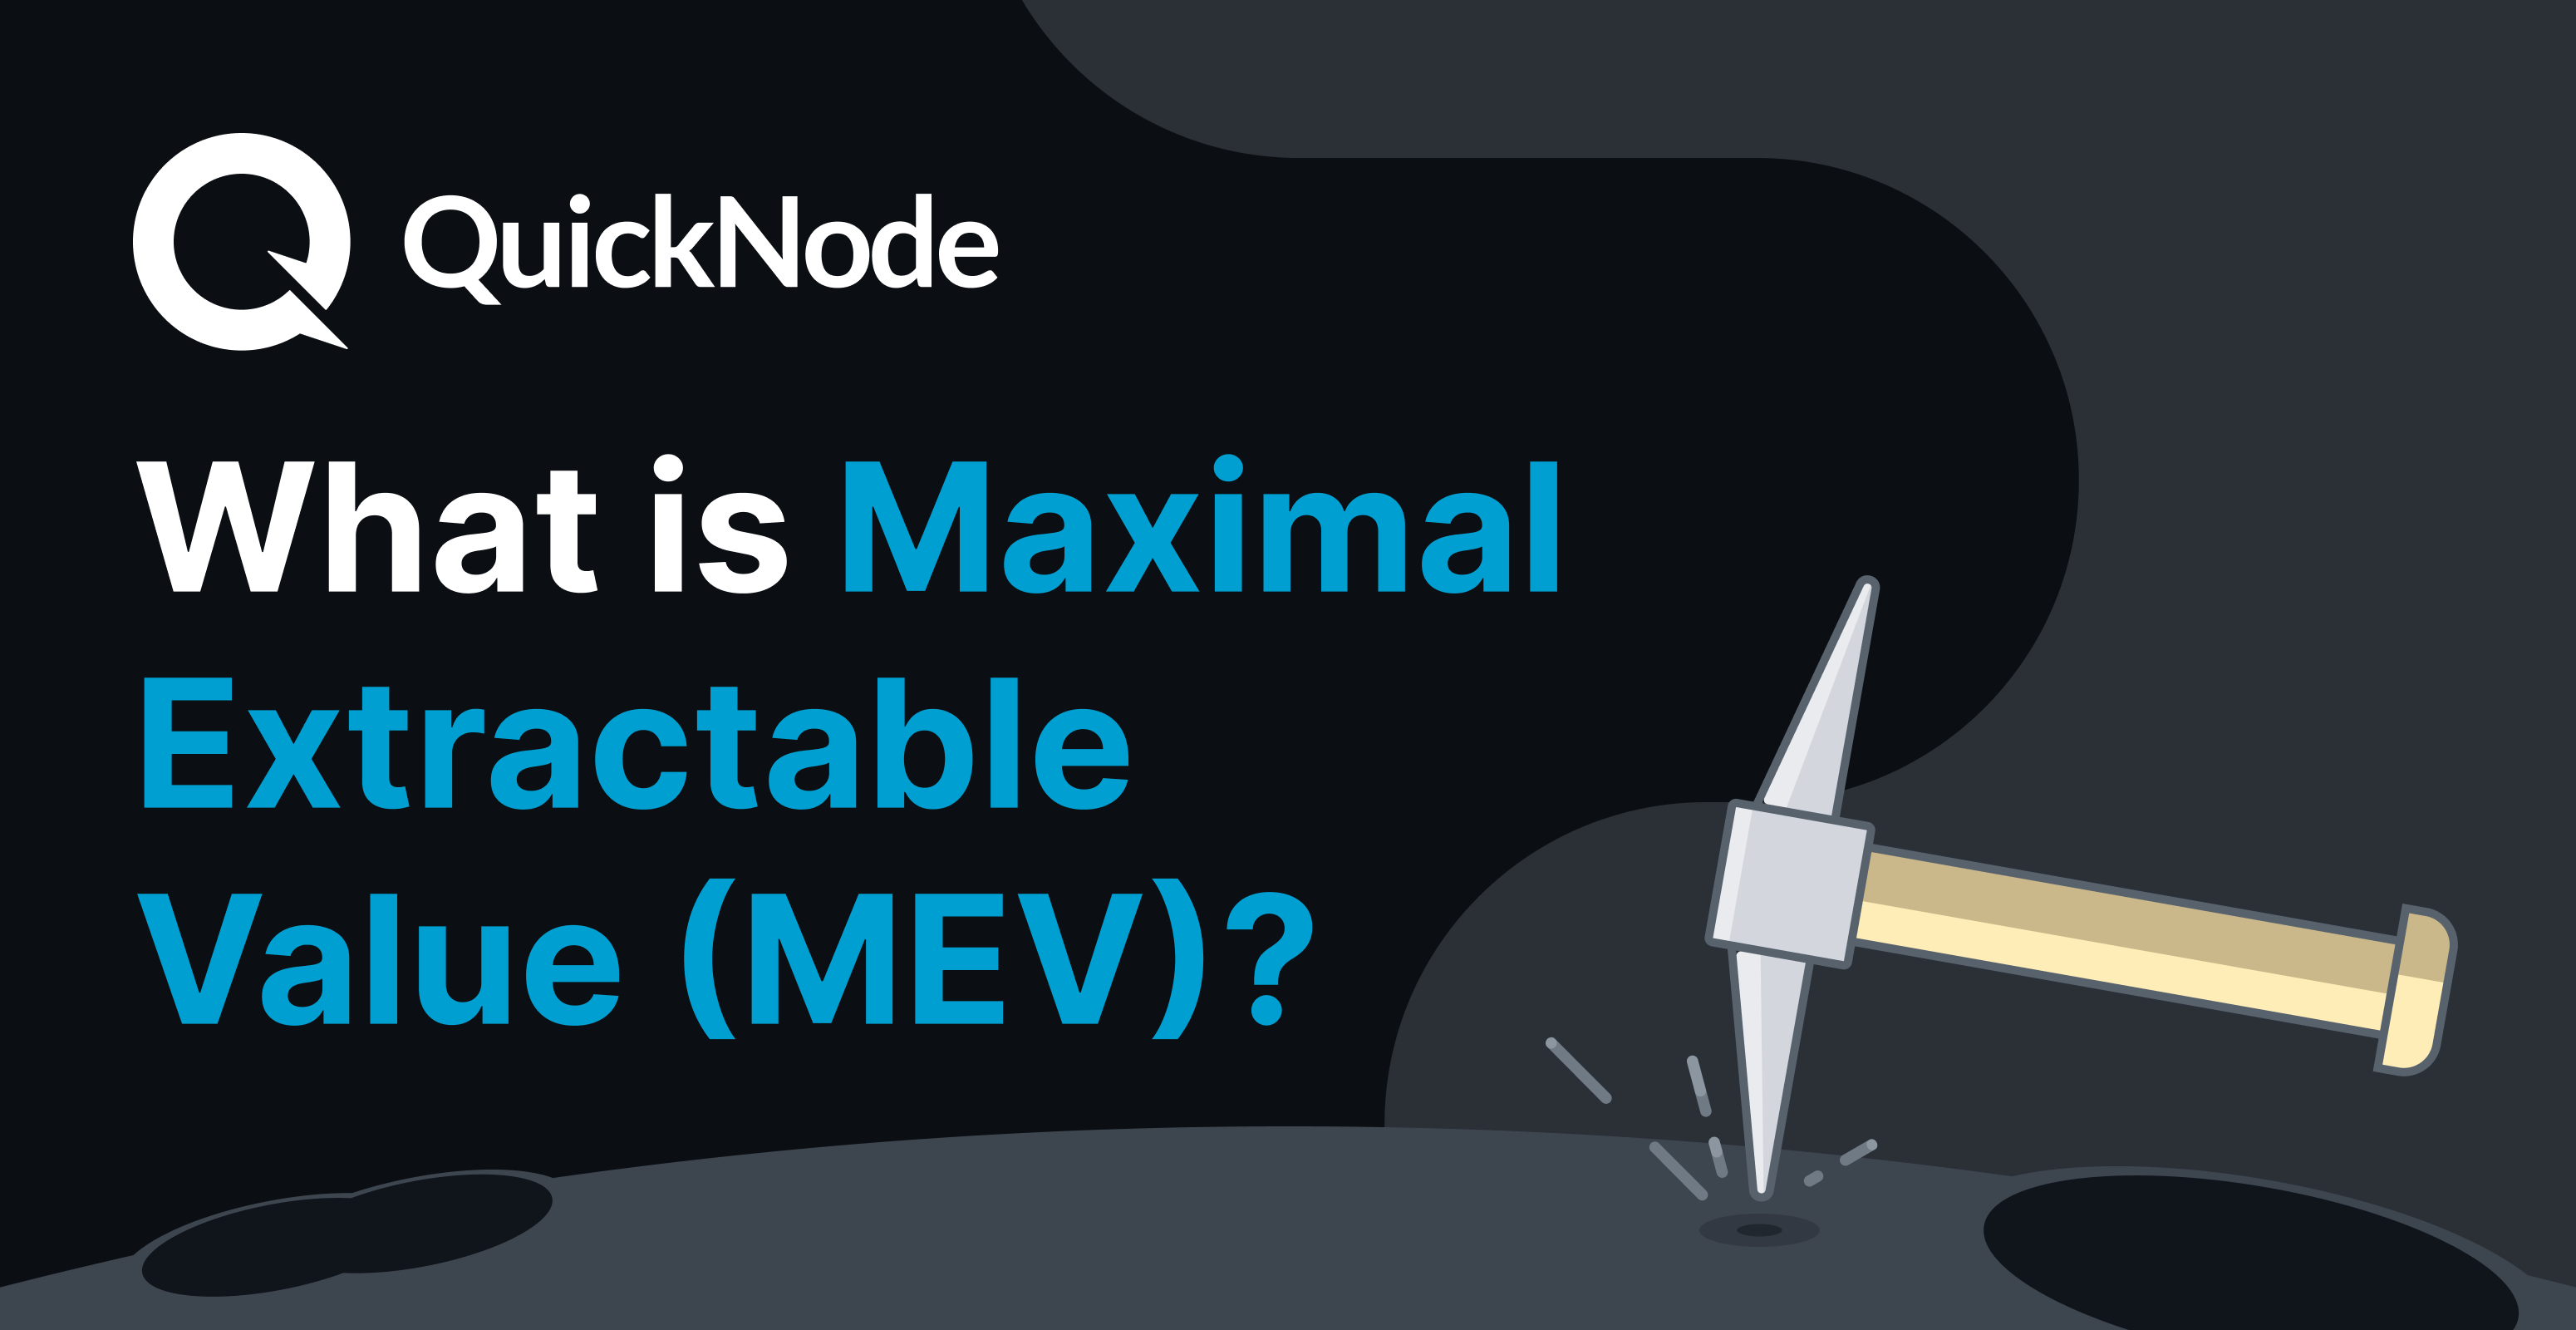 what-is-maximal-extractable-value-mev-quicknode